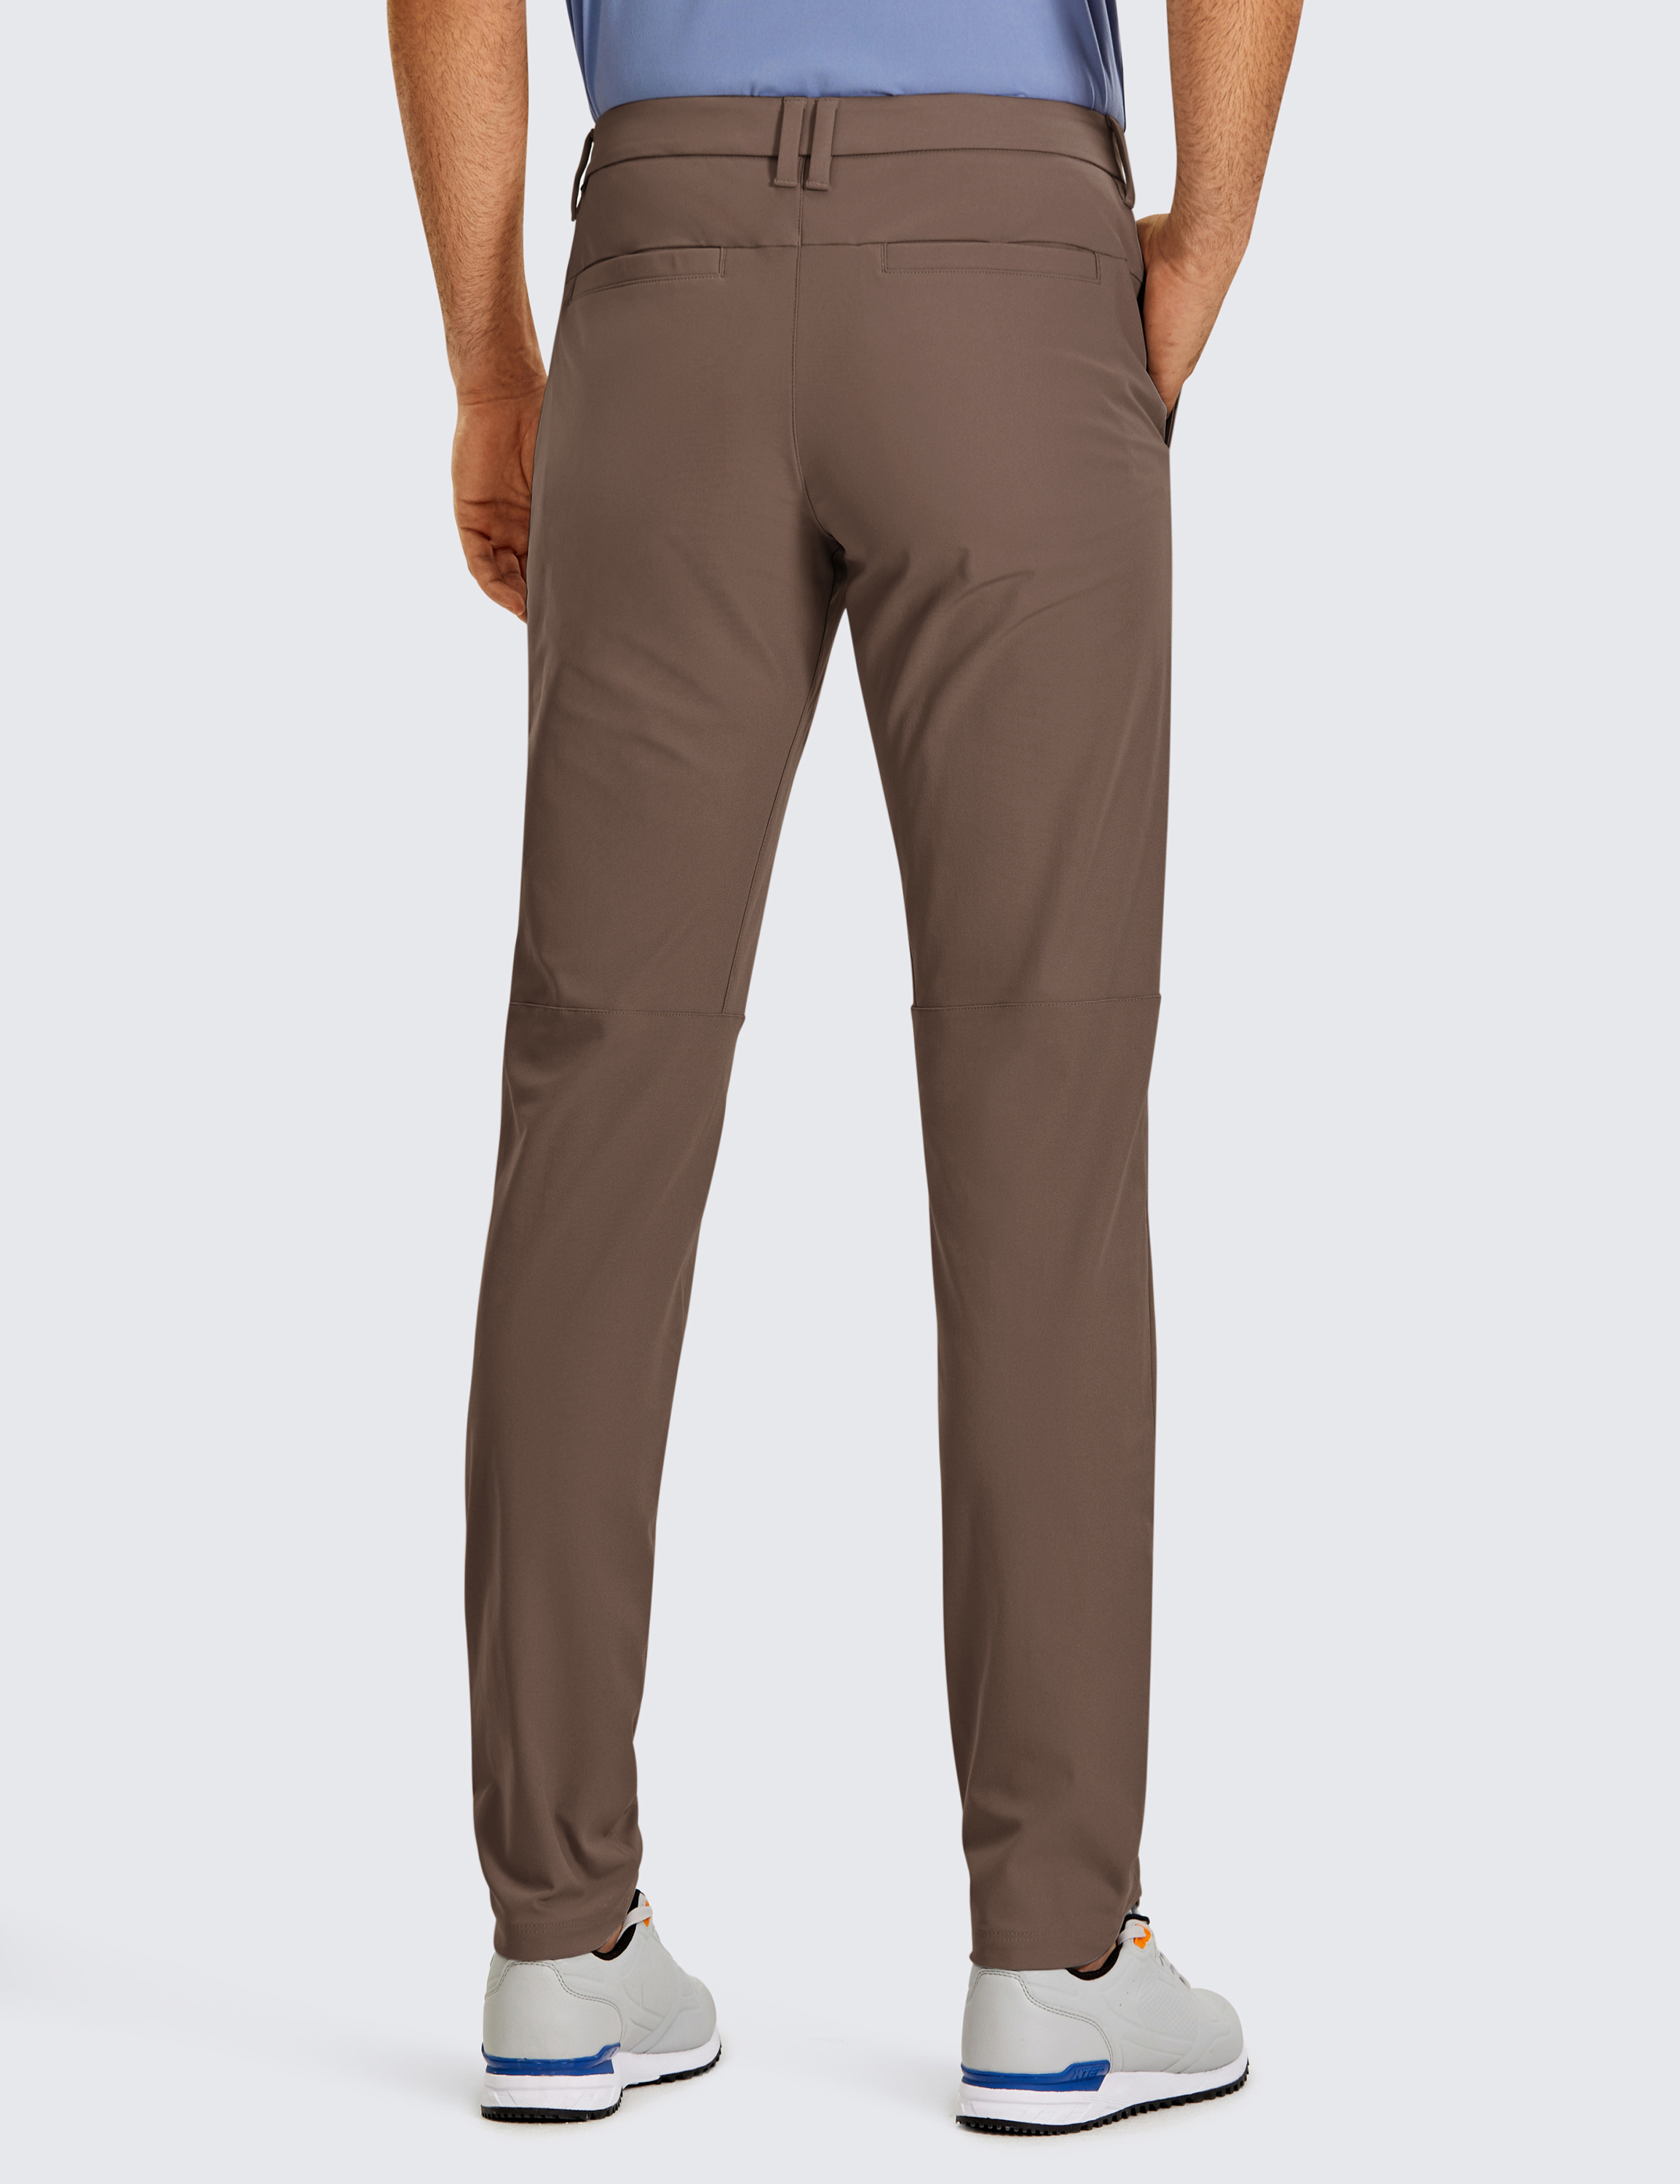 Men's All Day Comfy Golf Pants with 5-Pocket - 30/32/34'' Quick